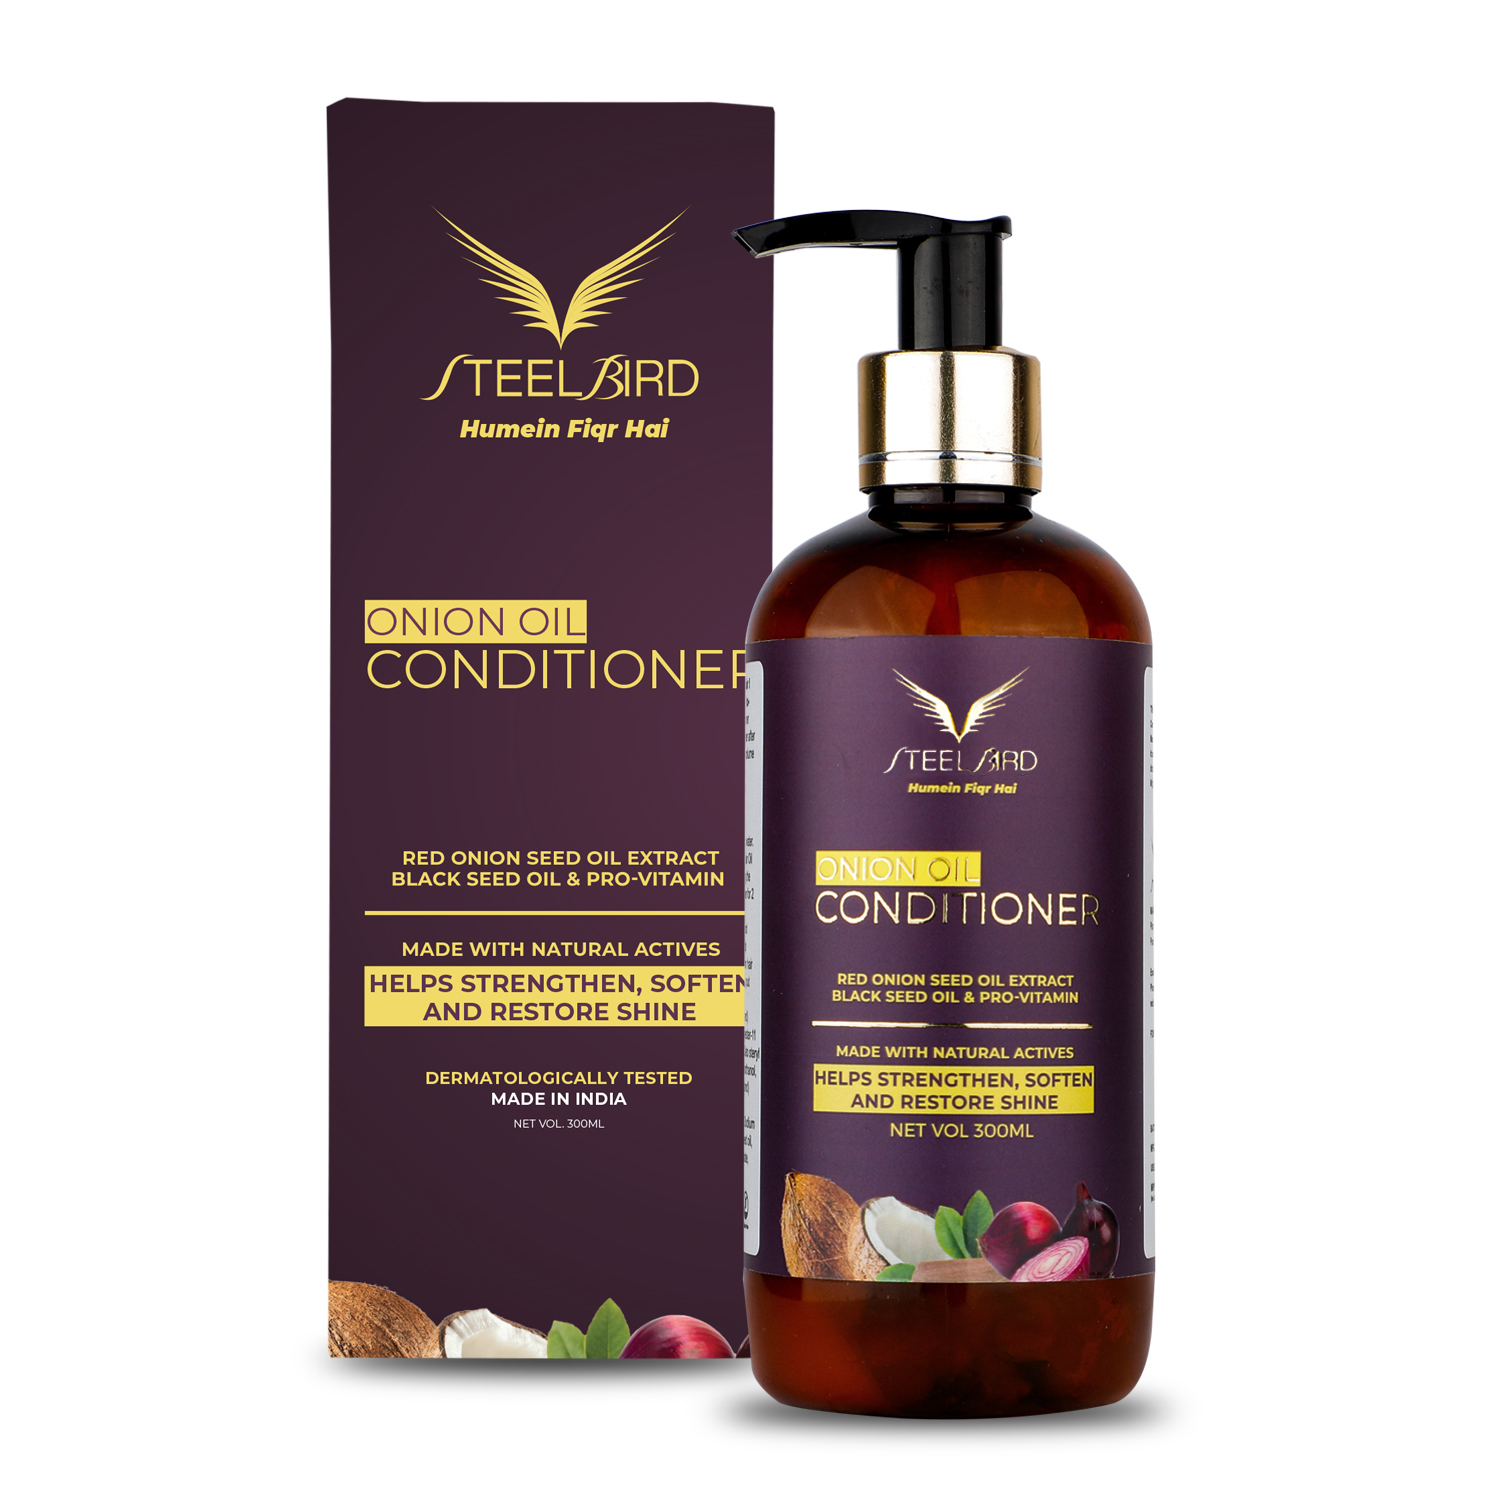 Steelbird Hair Care Onion Conditioner With Red Onion Seed Oil Extract, Black Seed Oil & Pro-Vitamin B5 - No Parabens, Mineral Oil, Silicones, Color & Peg - 300 ml